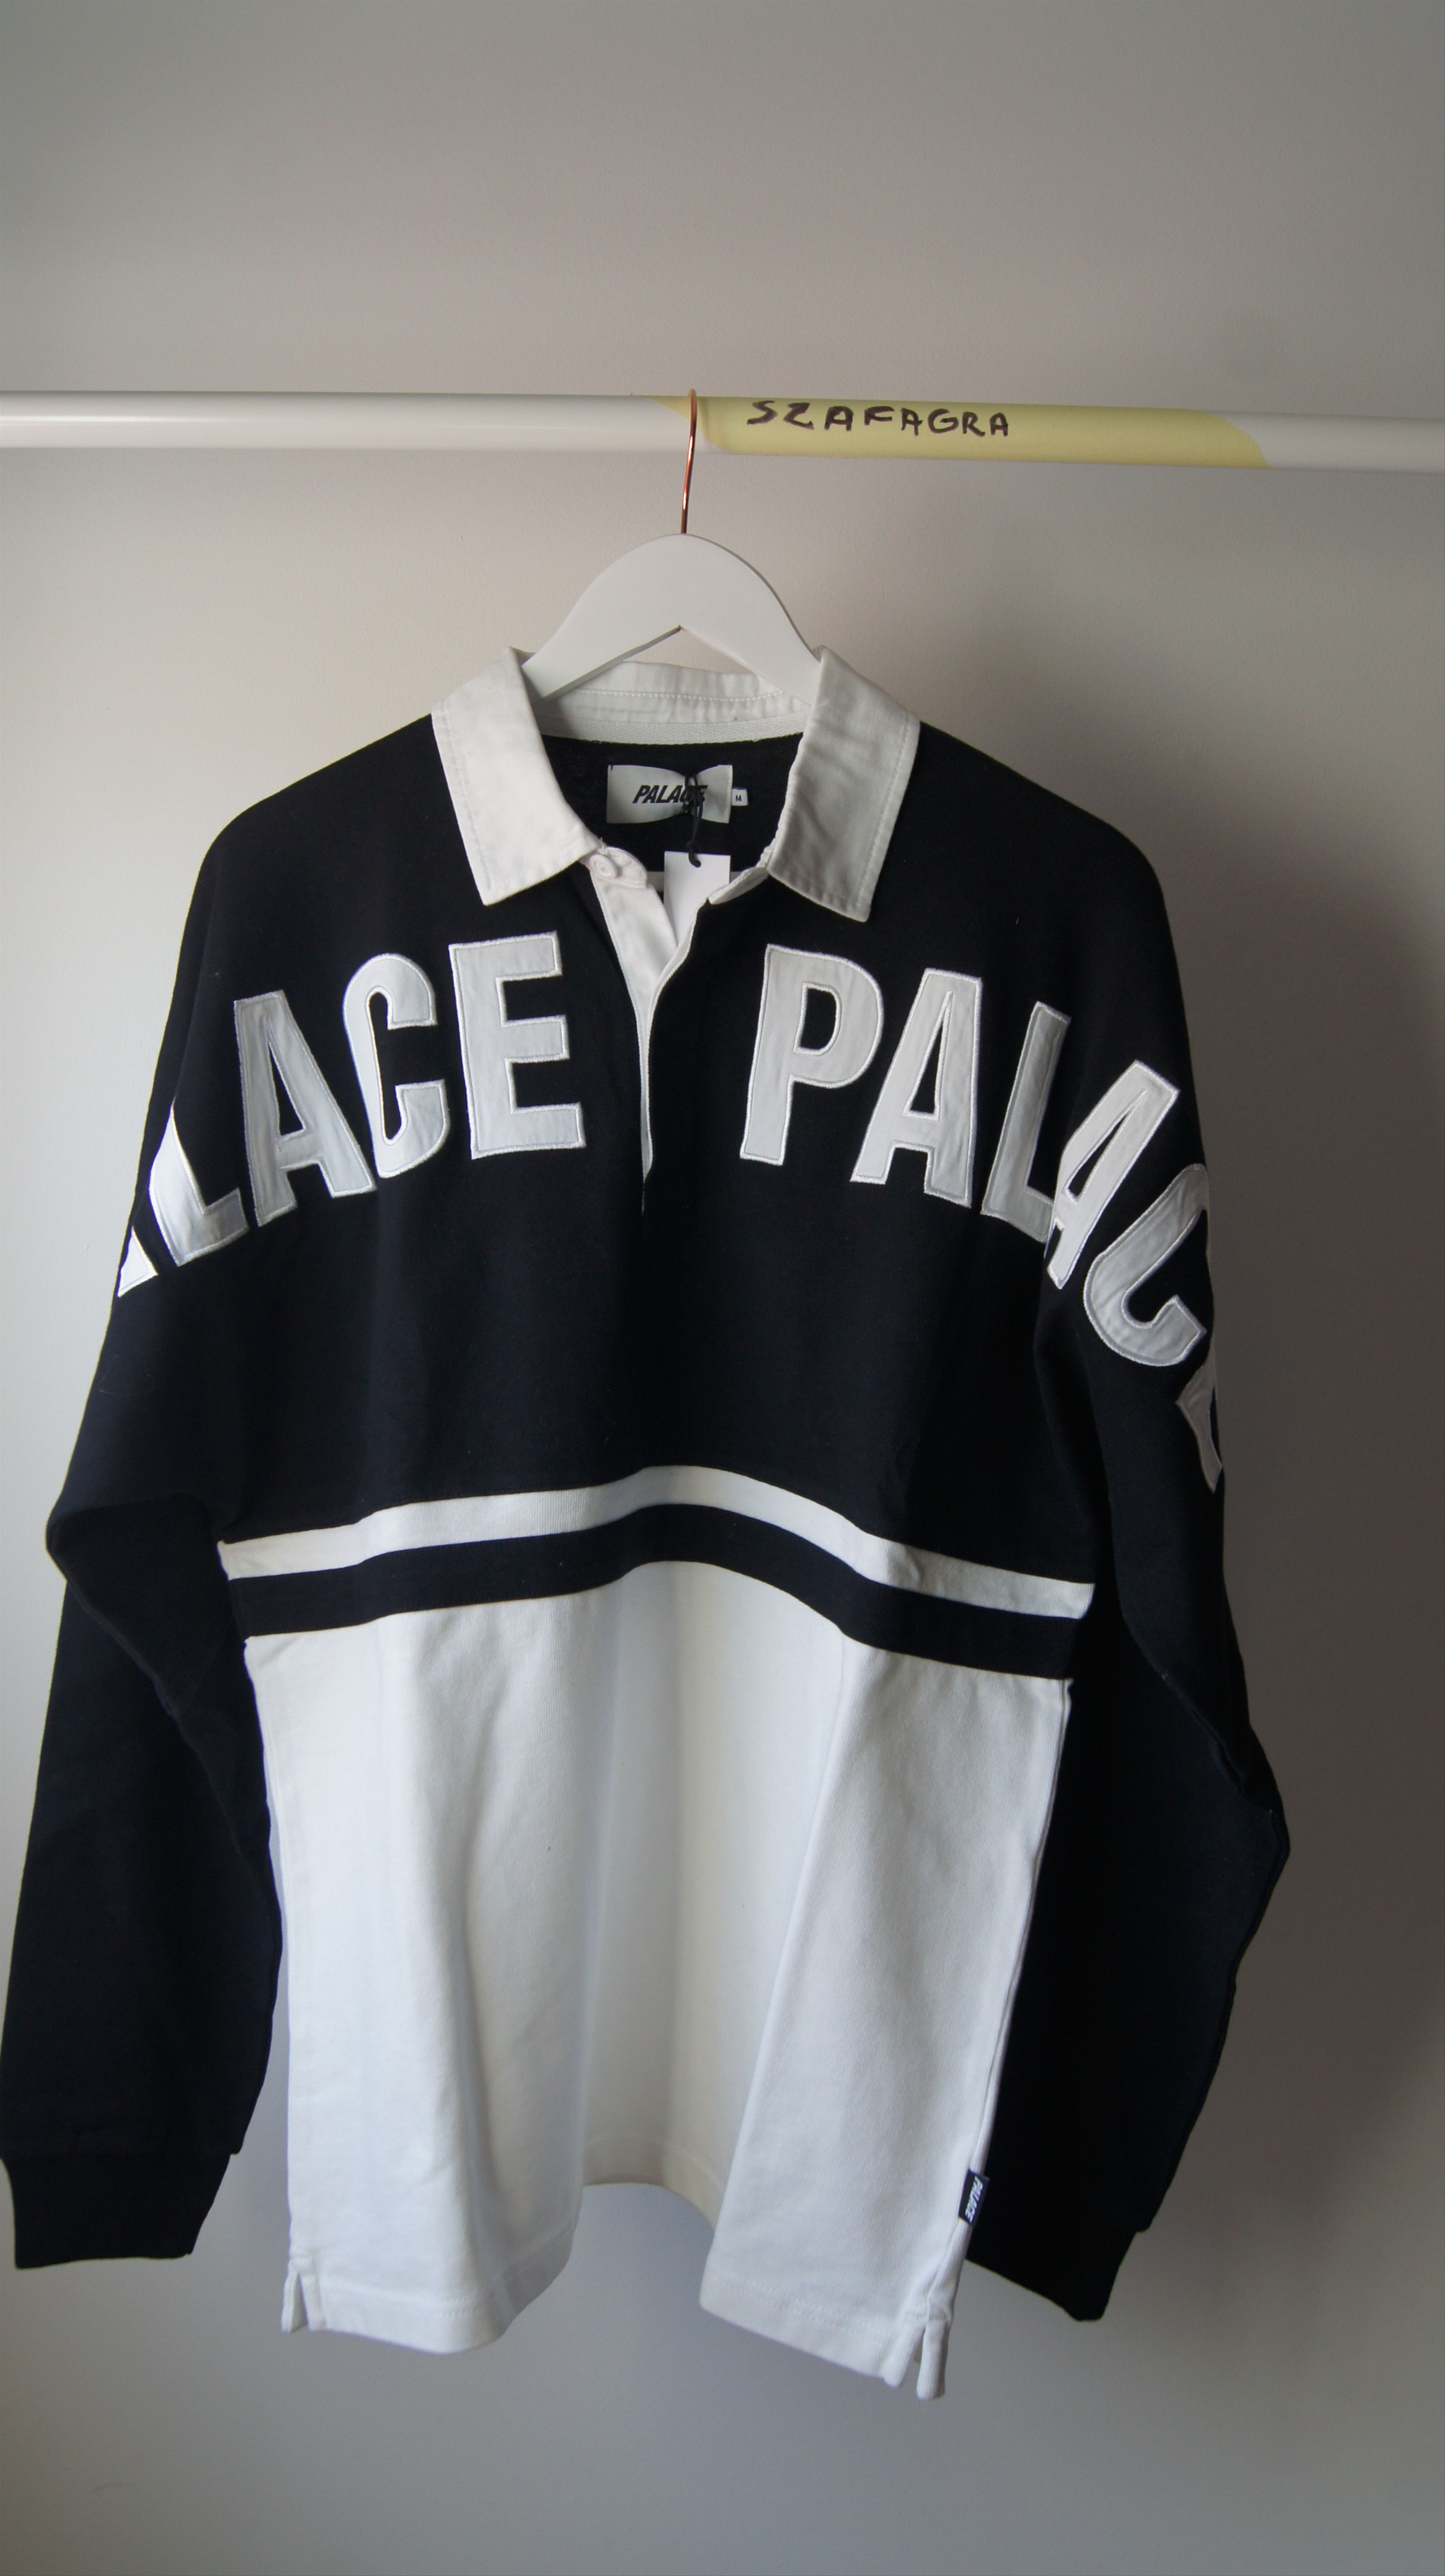 Palace P 2 Rugby | Grailed